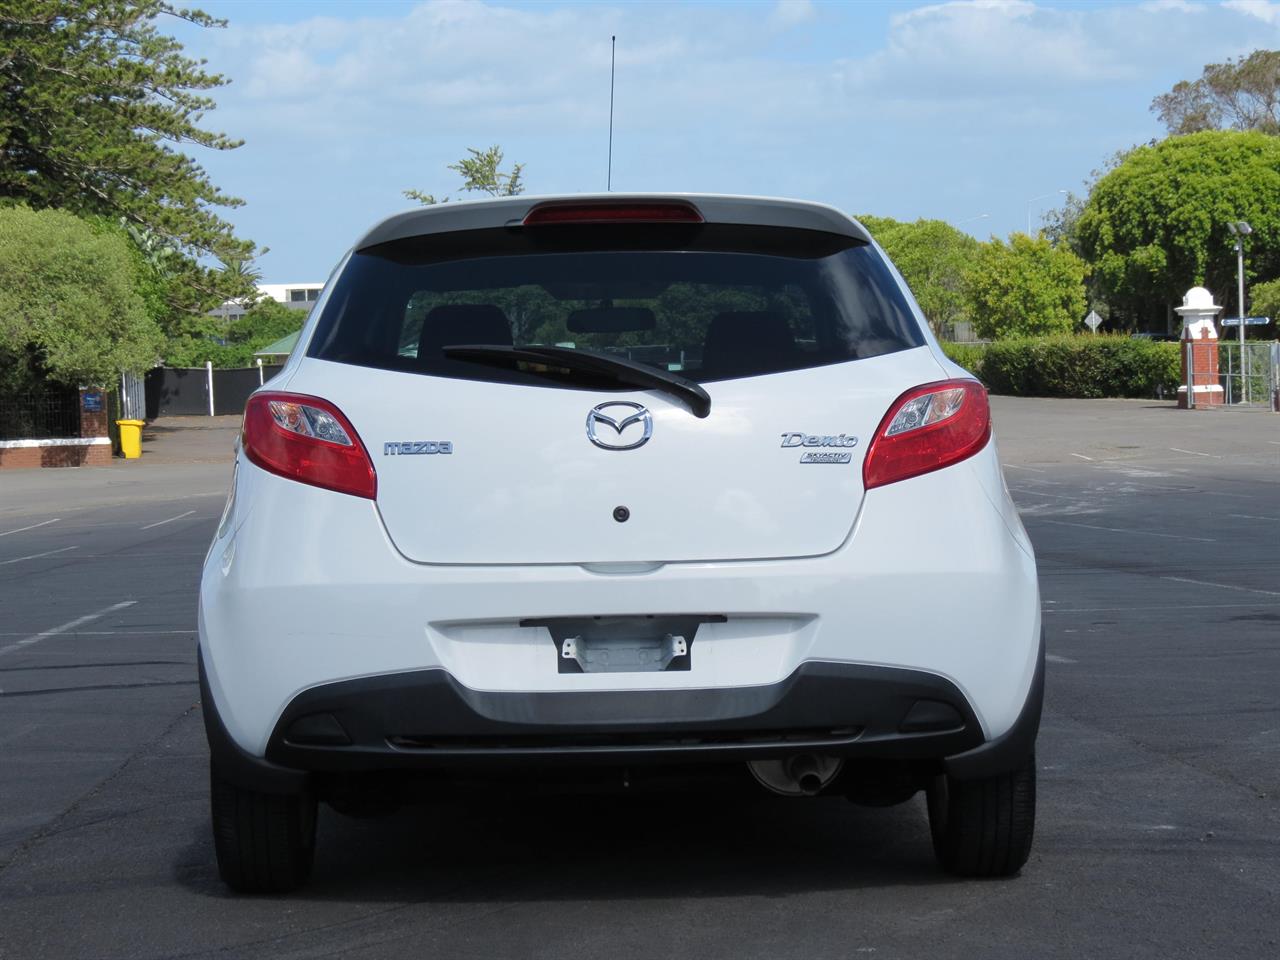 2013 Mazda Demio only $32 weekly